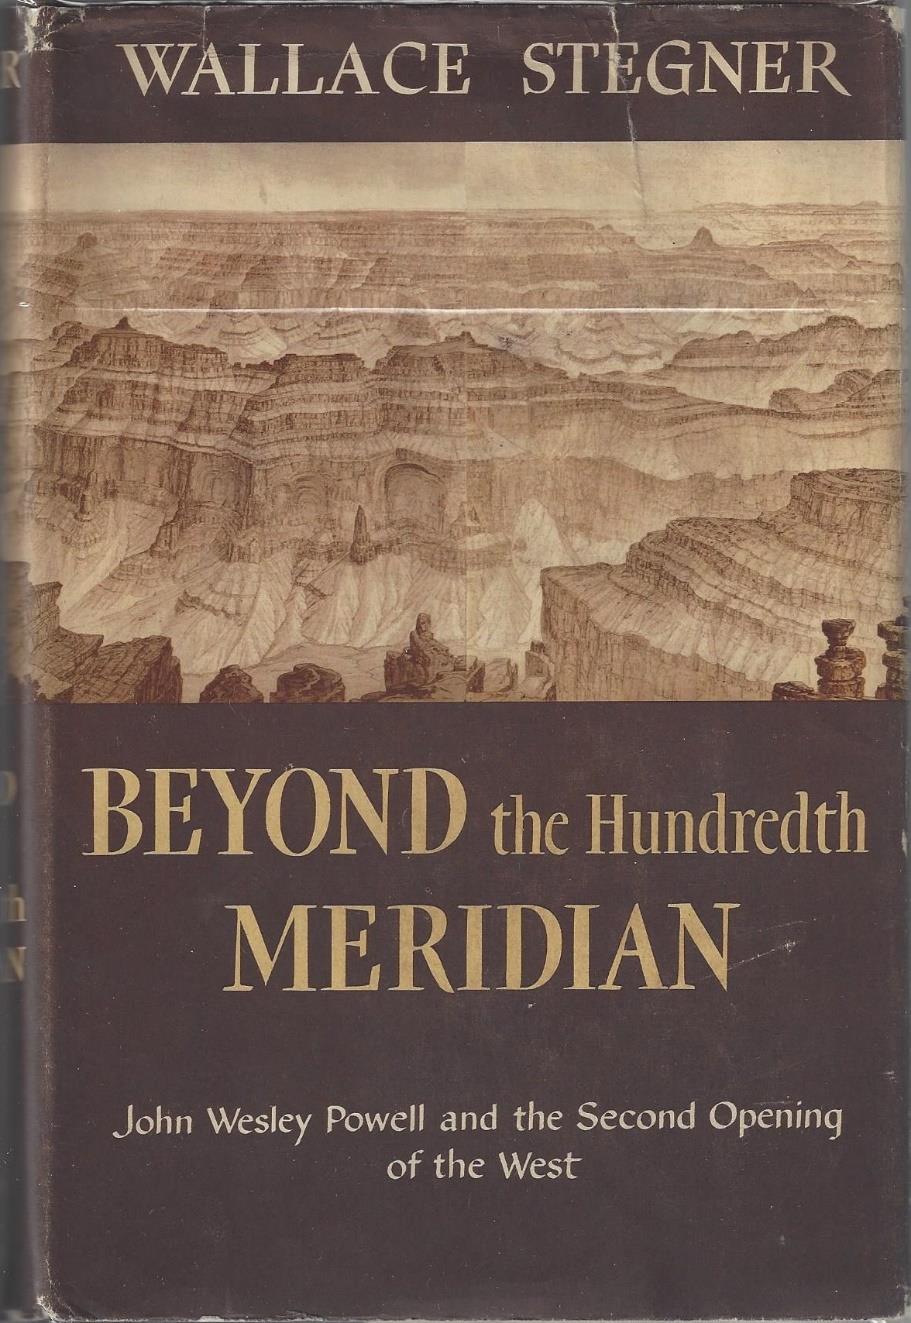 Stegner on Powell 13- Stegner, Wallace. Beyond the Hundredth Meridian: John Wesley Powell and the Second Opening of the West. Boston: Houghton Mifflin Company, 1954. First Edition. 438pp.